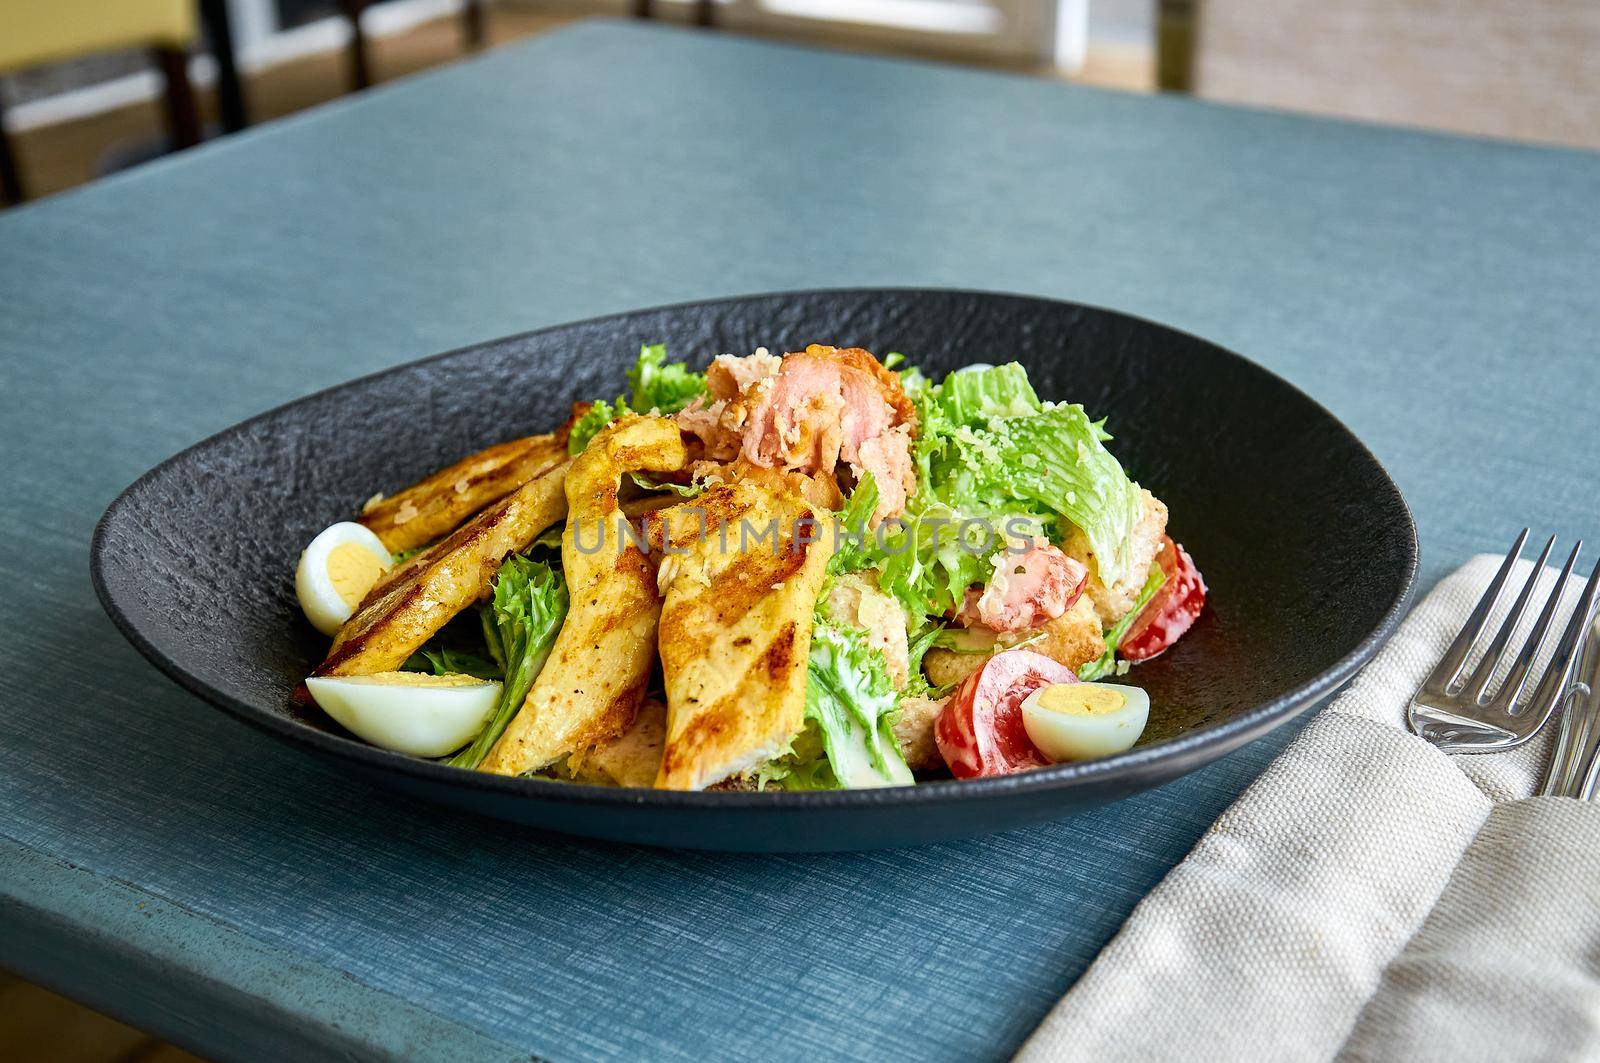 Fresh Caesar salad with chicken in a black bowl on the veranda of the restaurant.